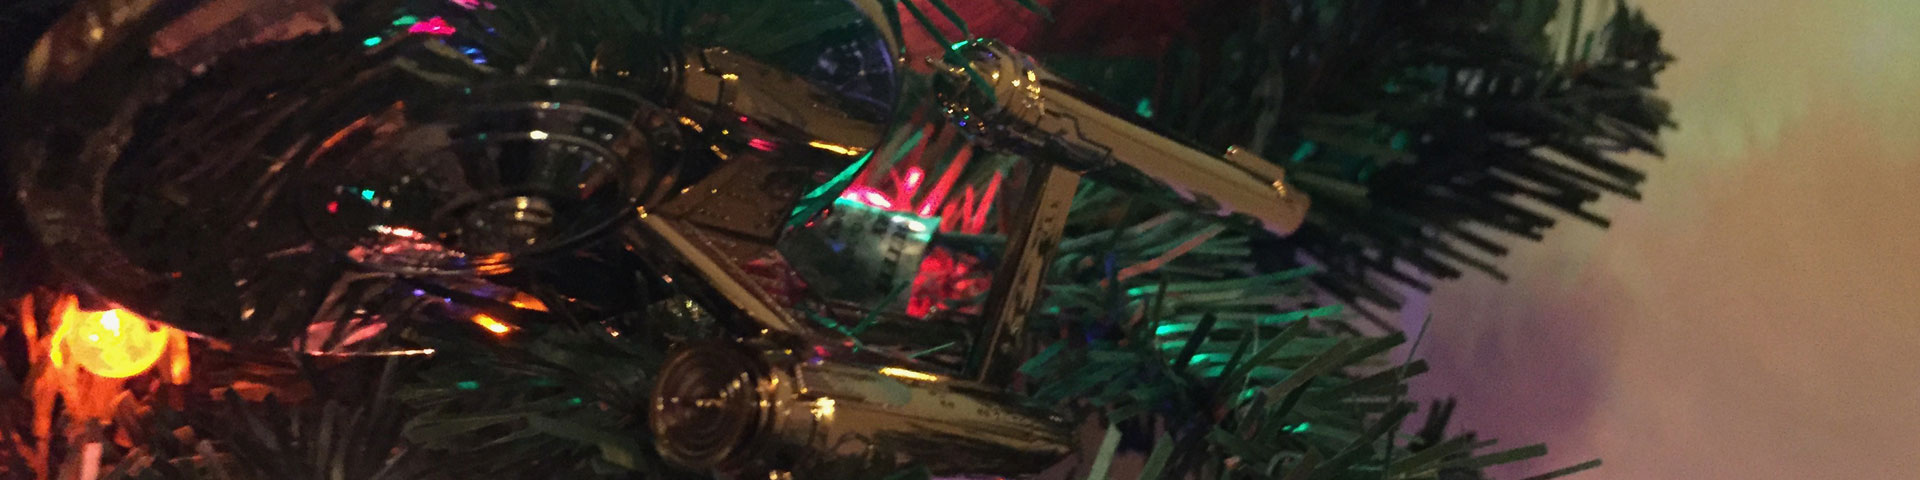 A golden starship reflects nearby Christmas lights as it hangs on an artificial tree.